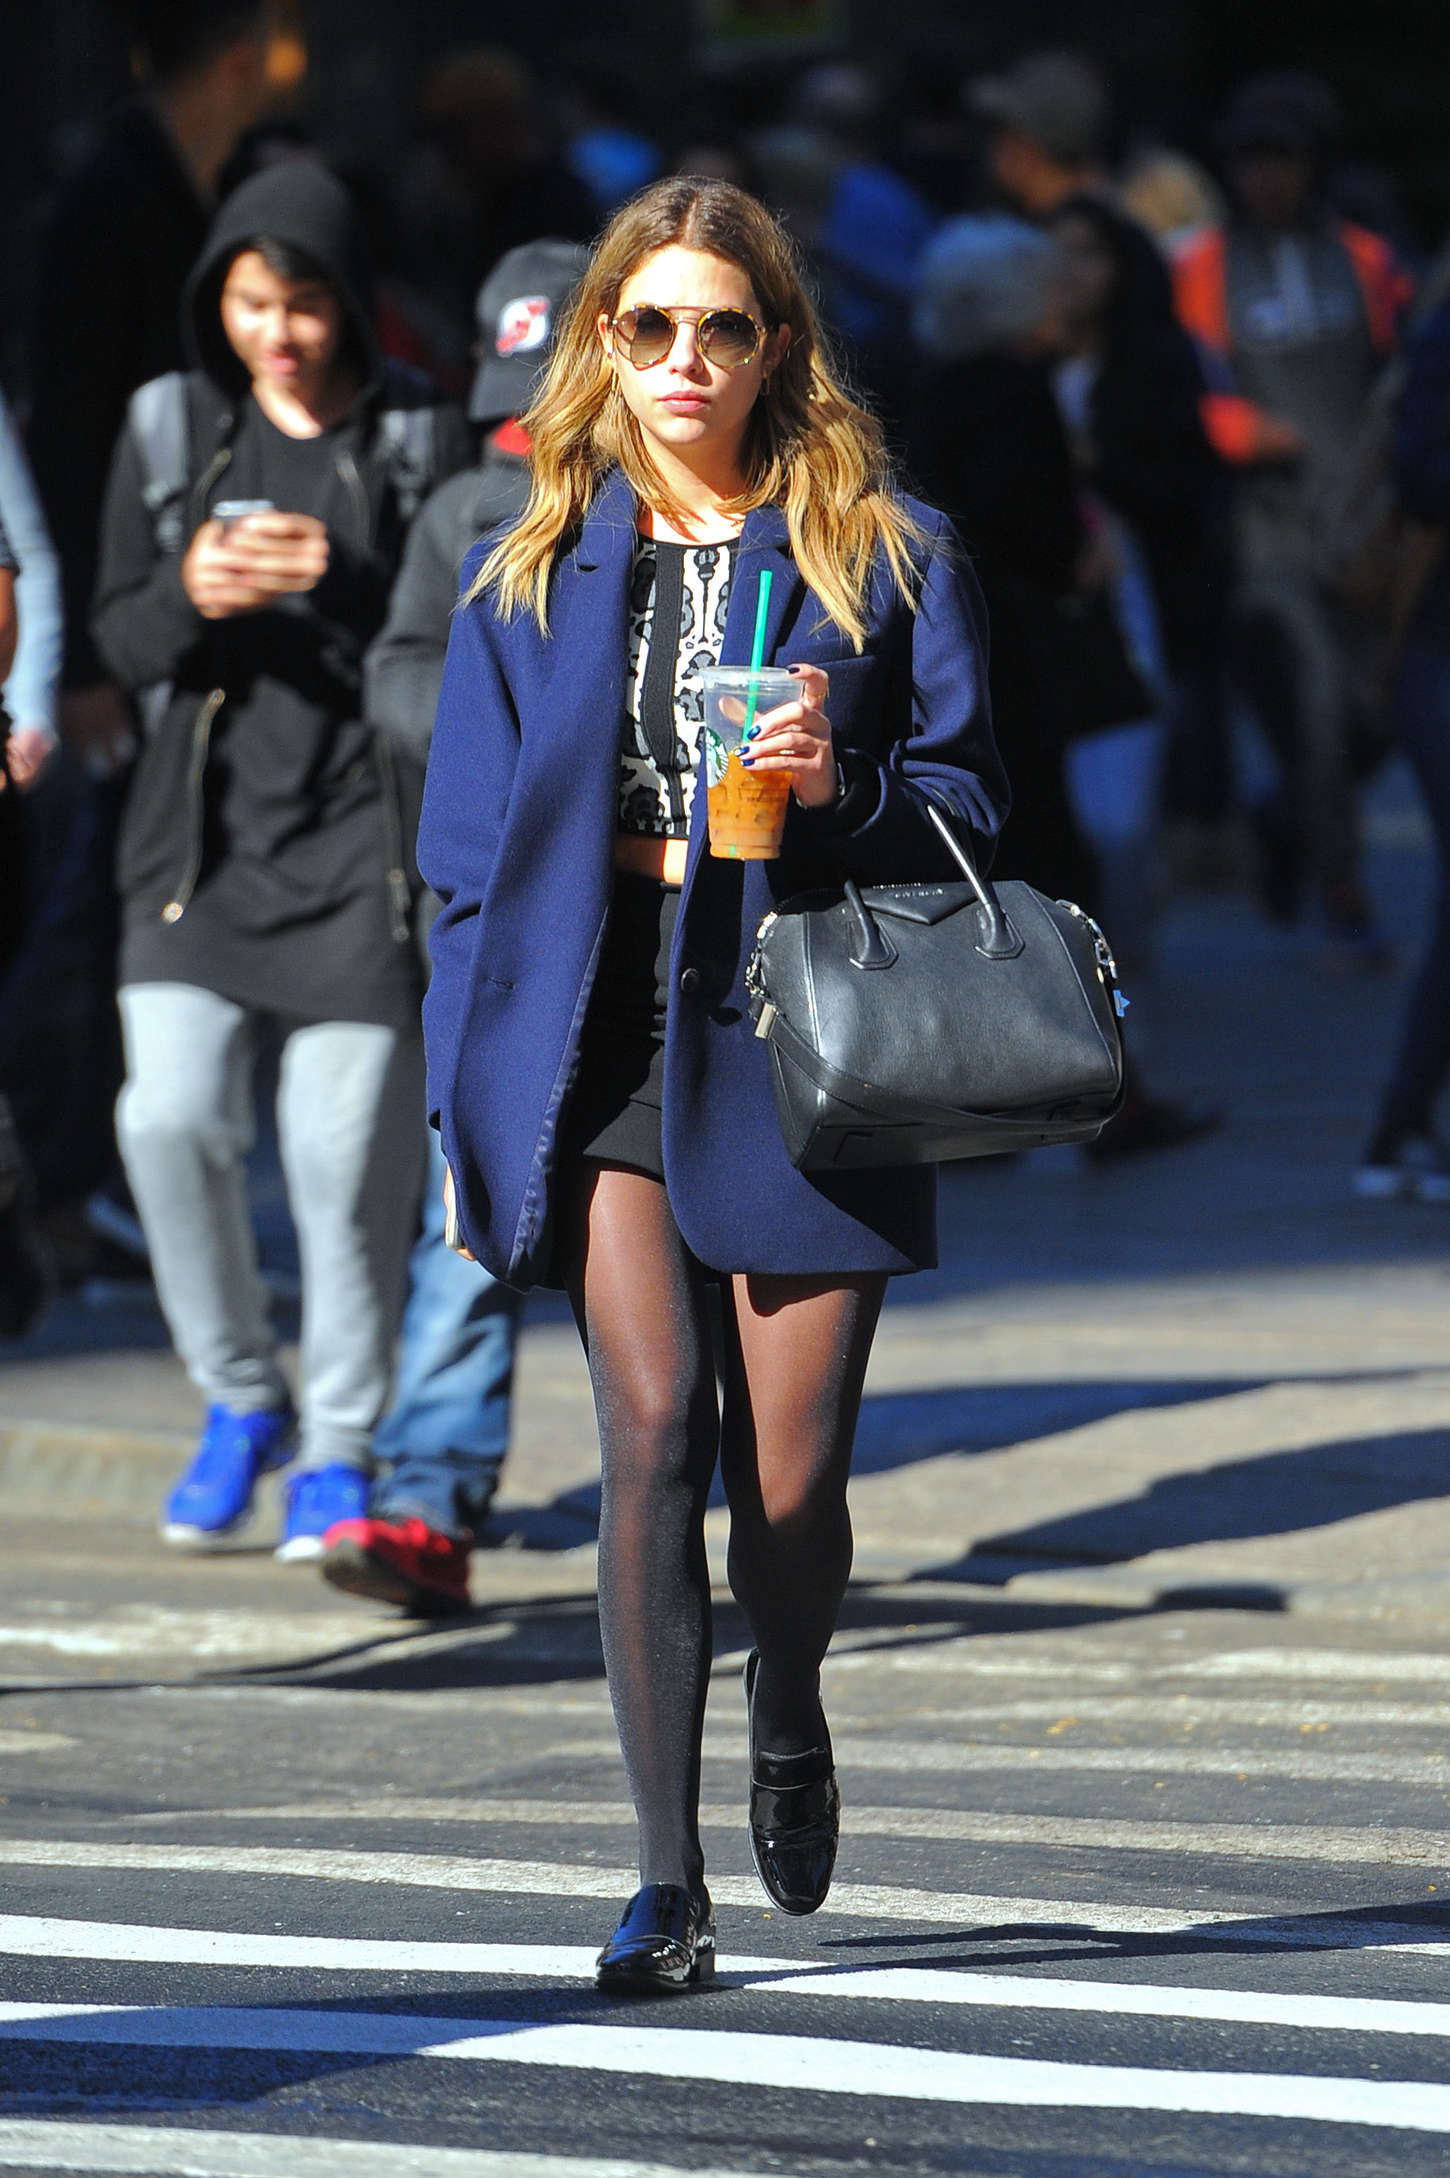 Ashley Benson in Mini Skirt Out in NYC